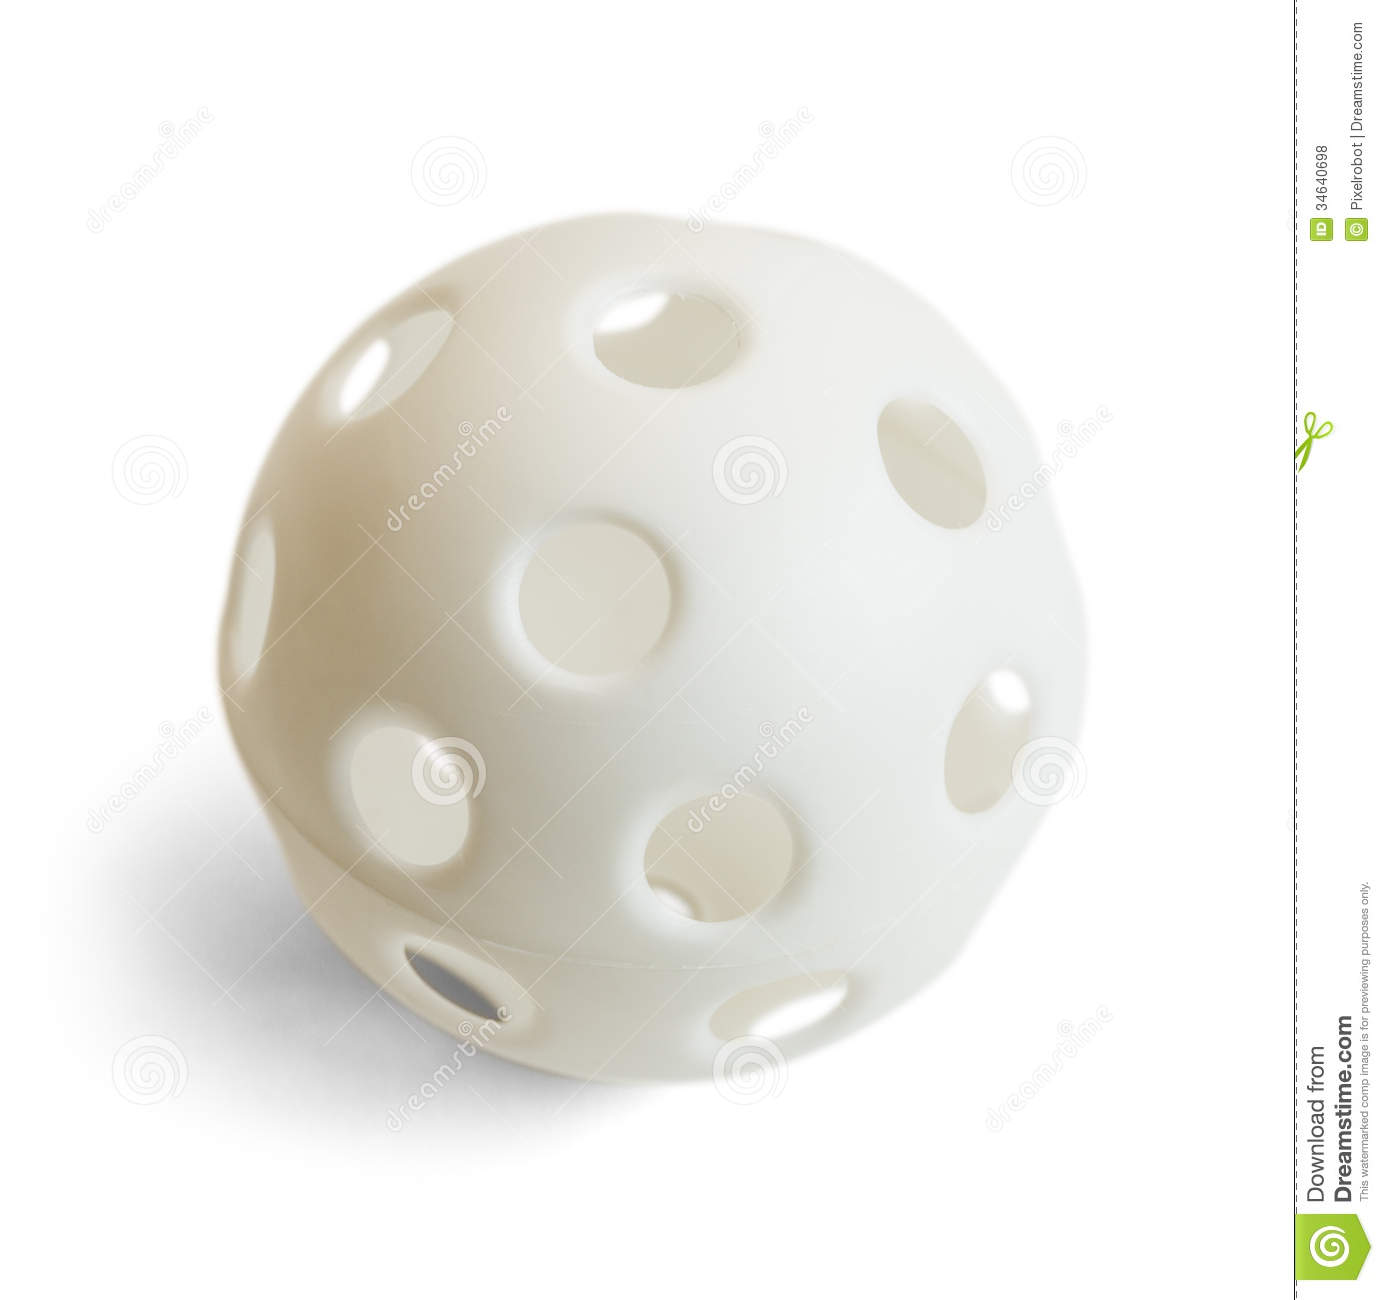 White Plastic Ball With Holes Isolated On White Background 